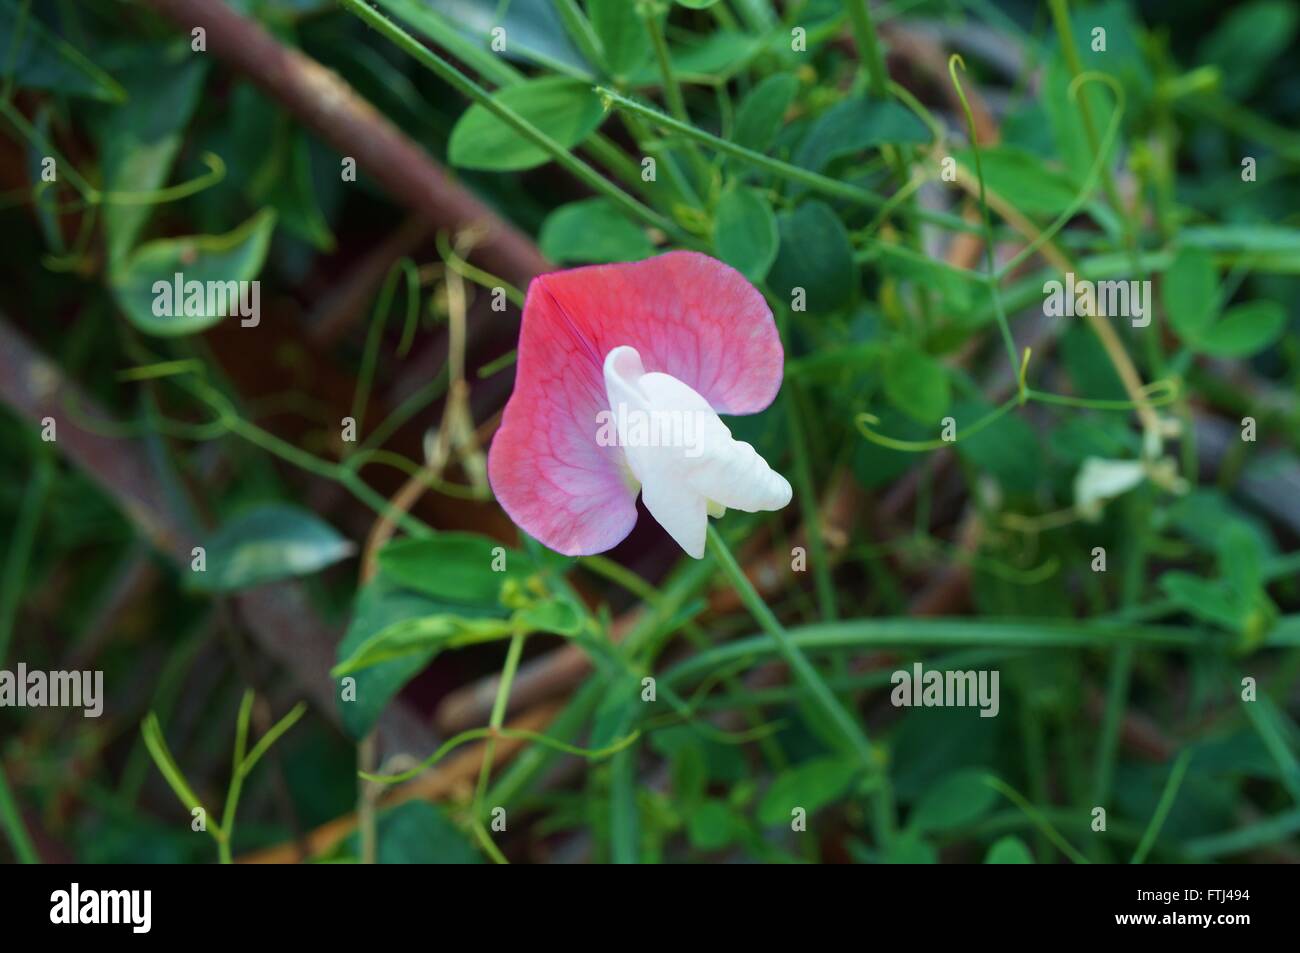 Fragrant pink and white sweet pea flowers climbing on the vine Stock Photo